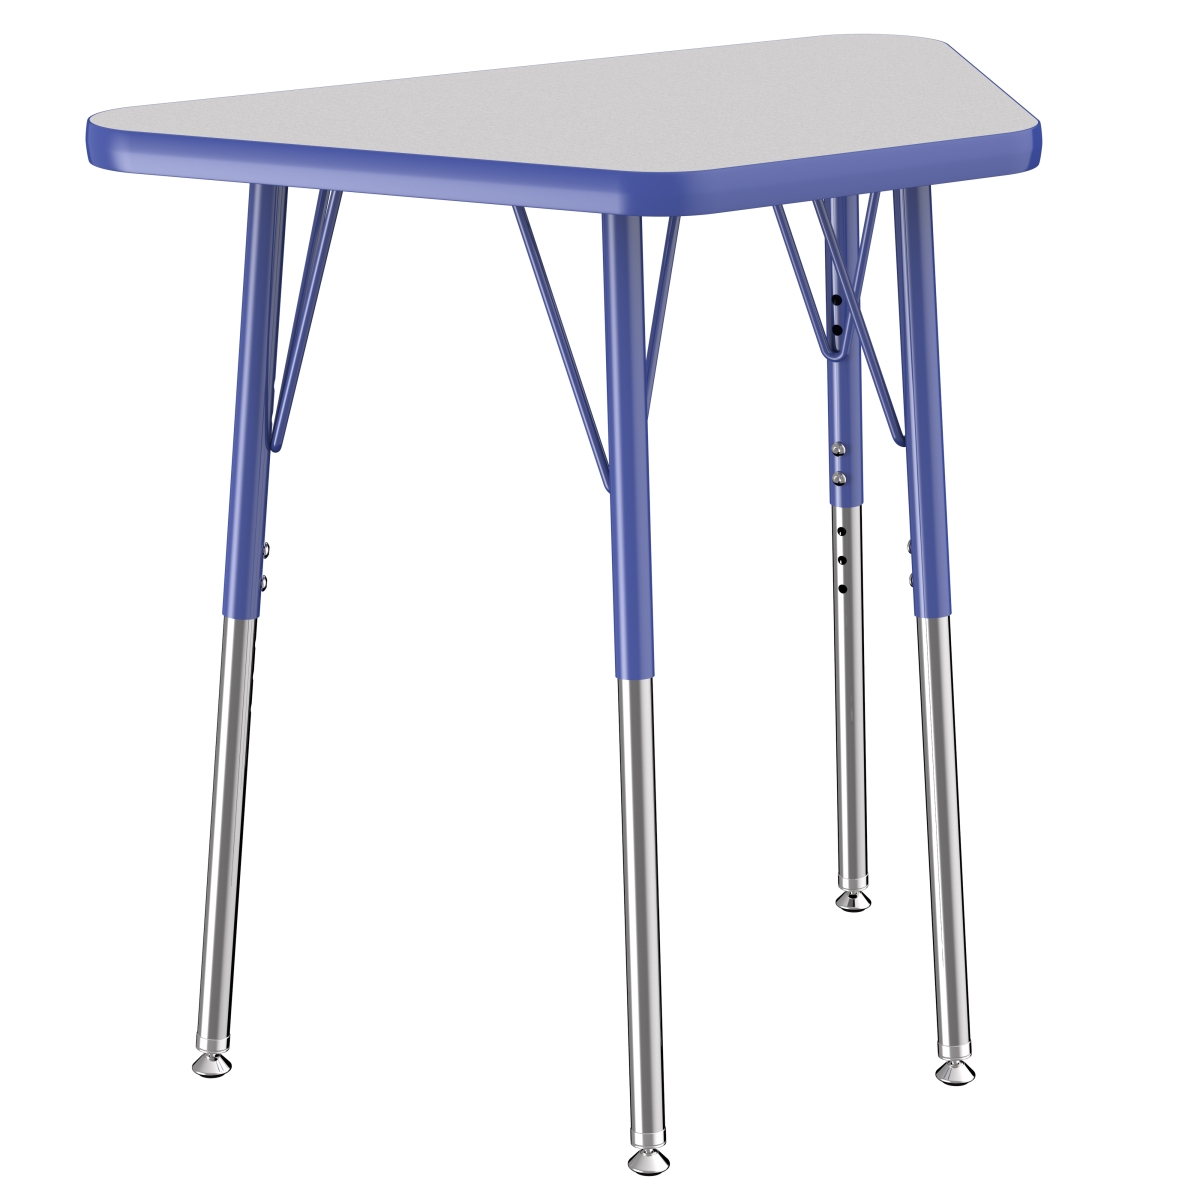 10063-gybl 18 X 30 In. Trapezoid T-mold Adjustable Activity Table With Standard Swivel - Grey & Blue